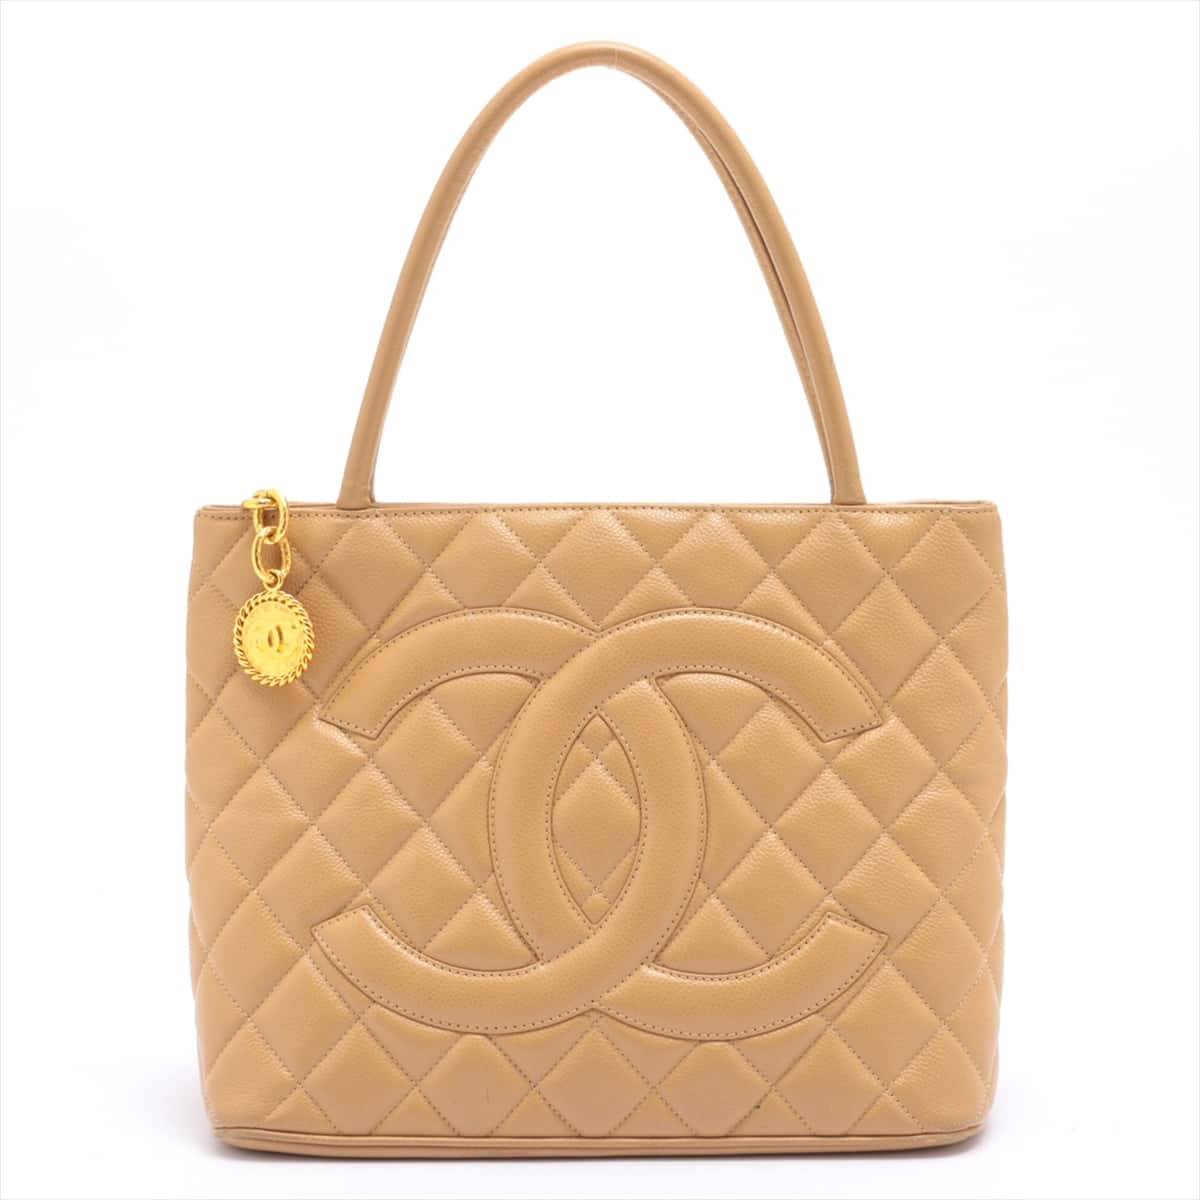 Chanel Re-release Caviarskin Tote bag Beige Gold Metal fittings 7XXXXXX